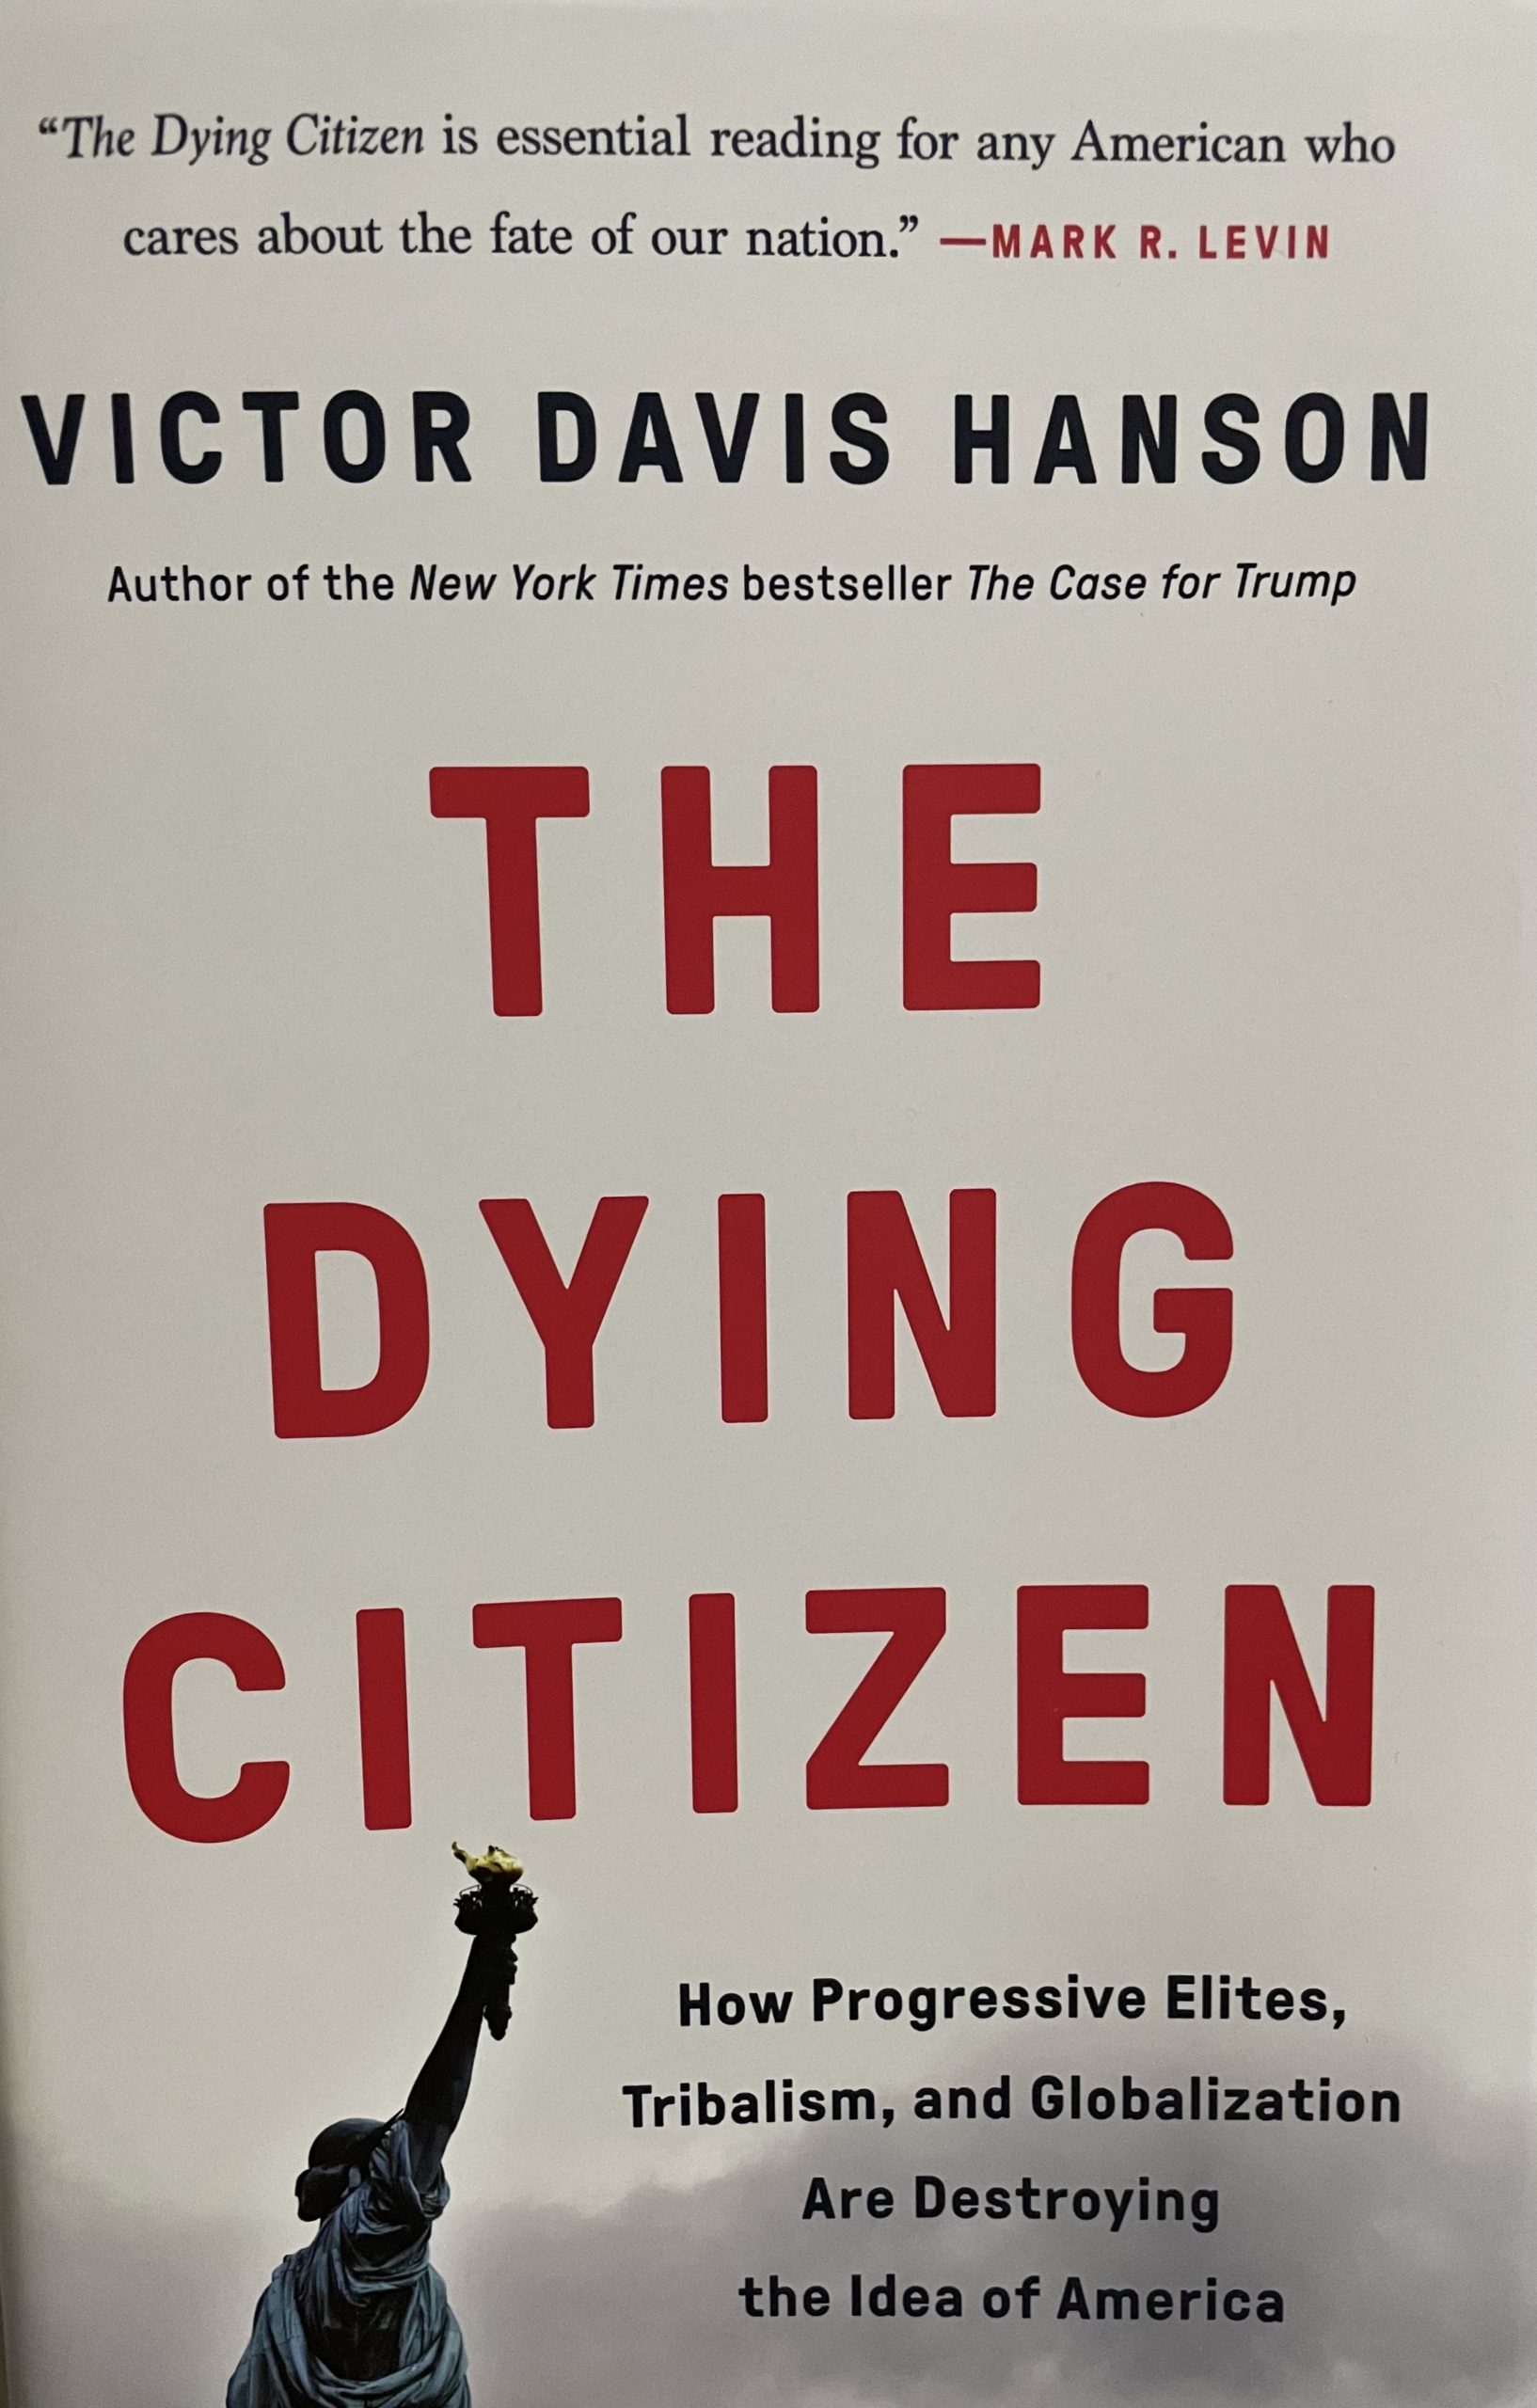 Book Review: Is 'The Dying Citizen' a Prediction of America's Future?